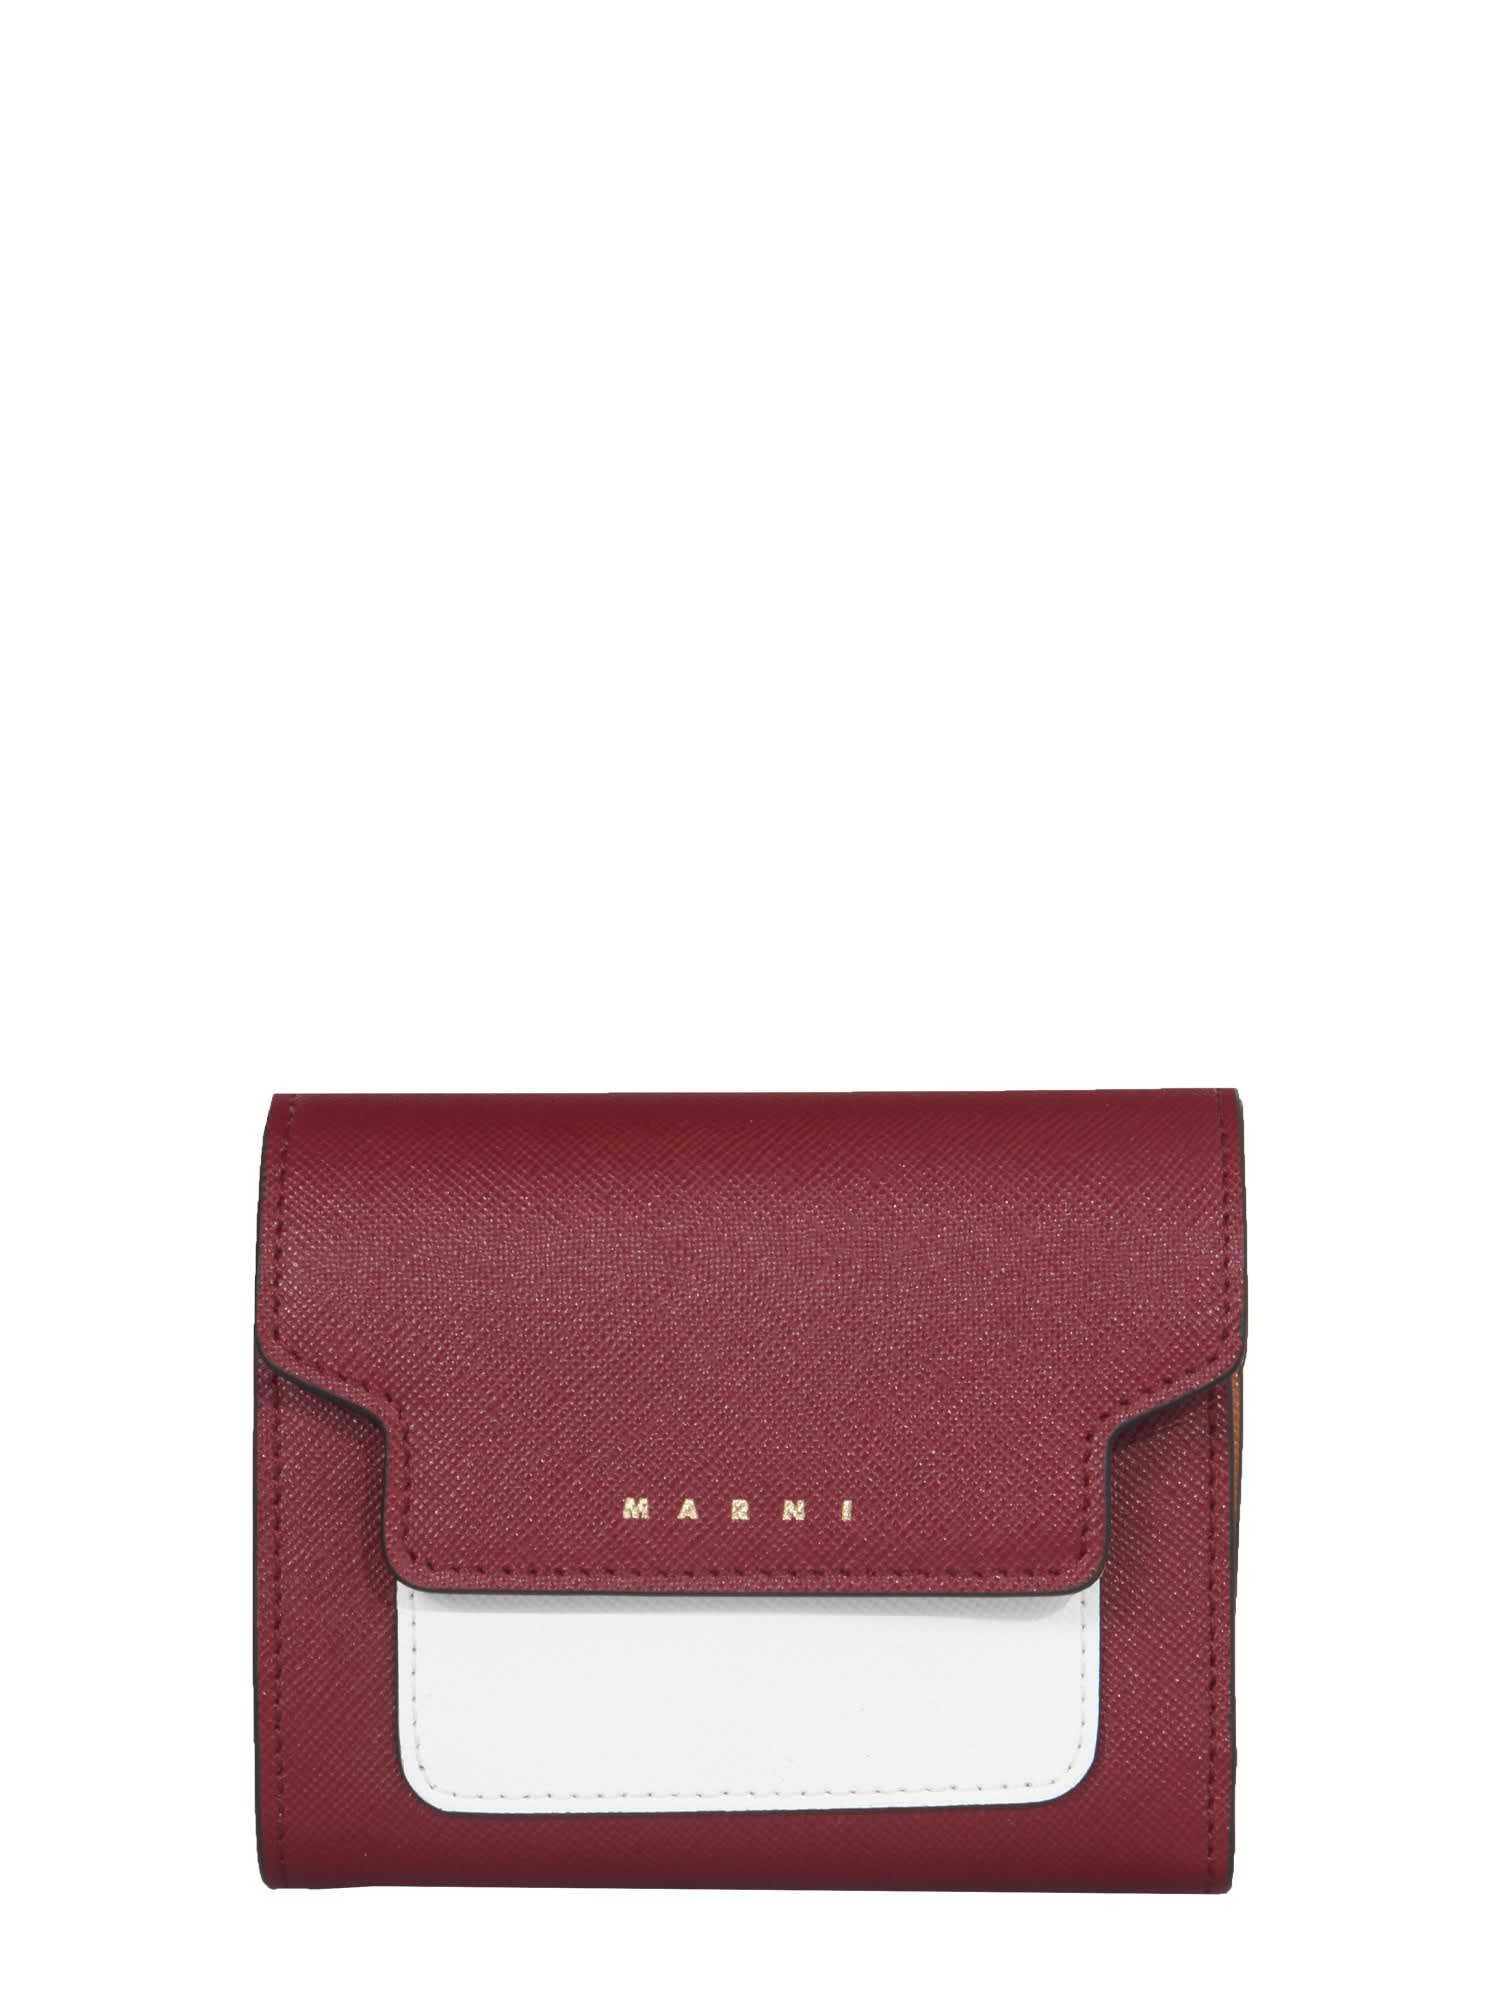 Marni Leather Wallet